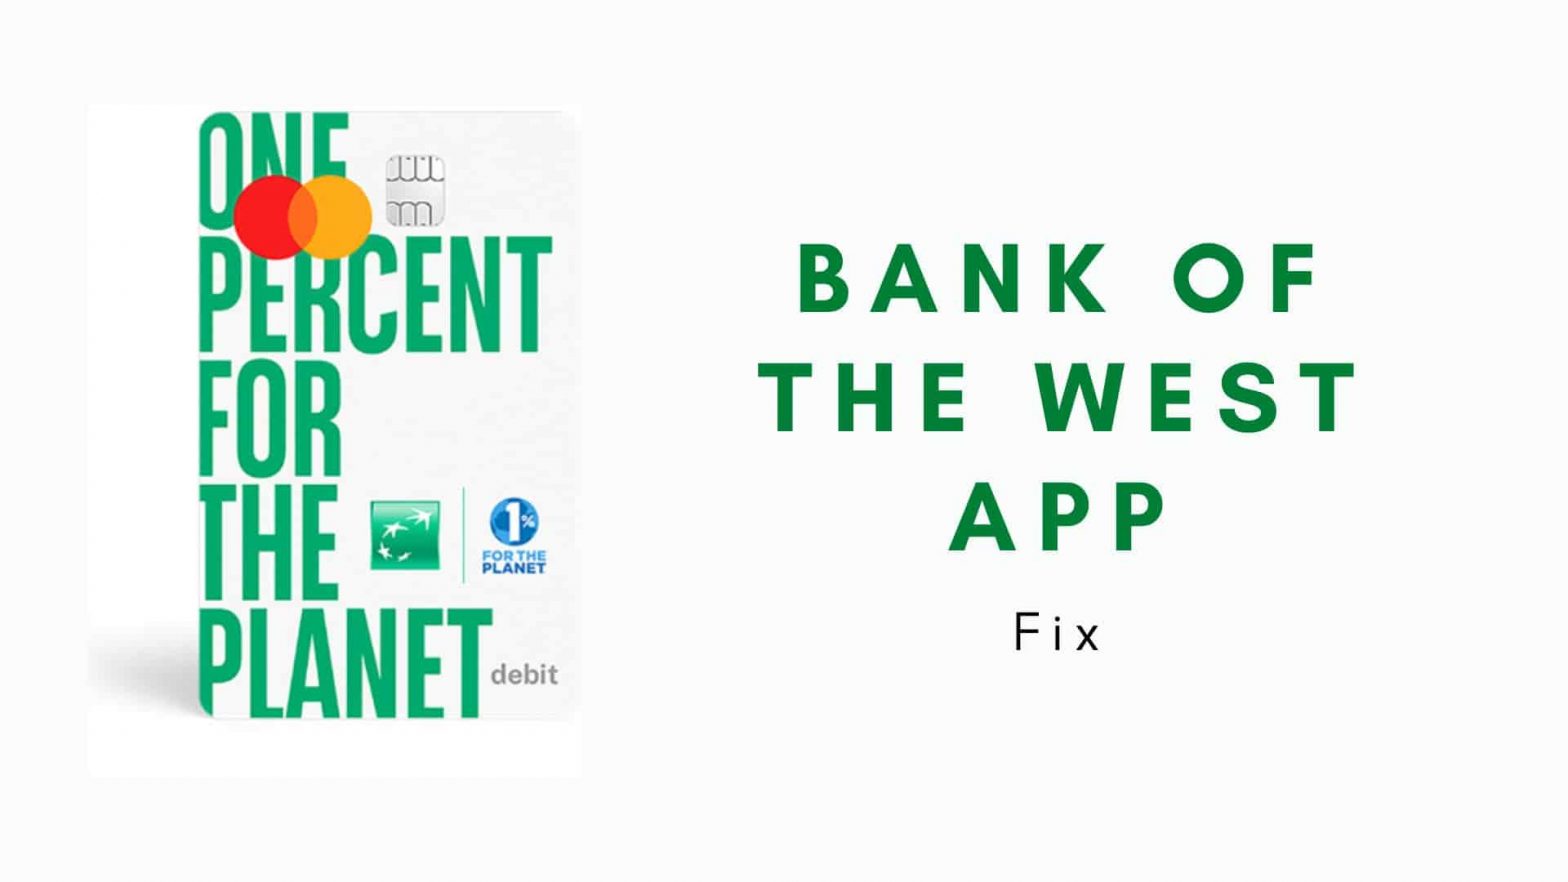 Why Bank of the West app is not working